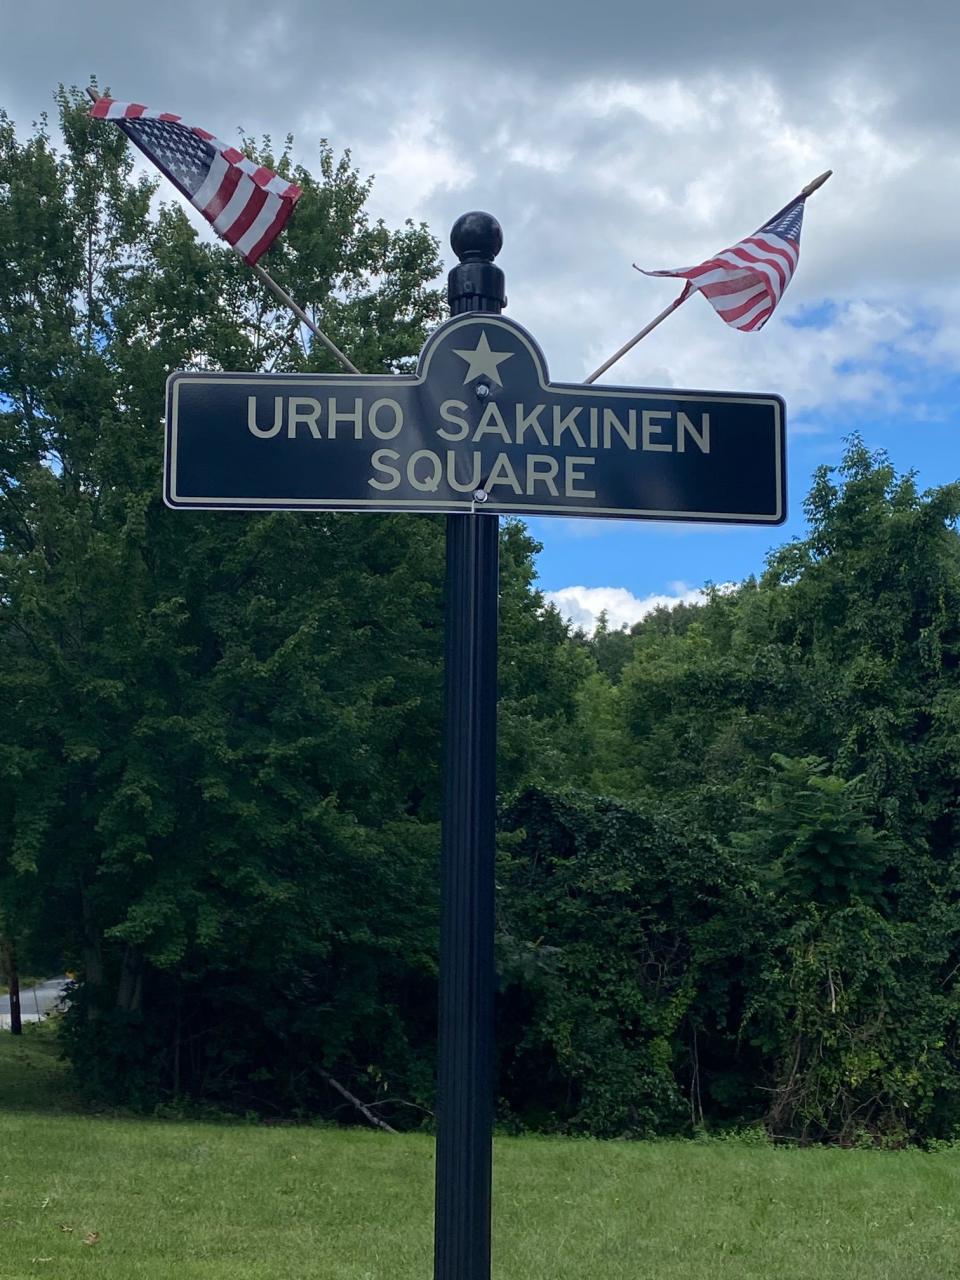 Urho Sakkinen Square at the corner of North Common and Overlook roads in Westminster, not far from where his family's dairy farm once operated on Bacon Street.